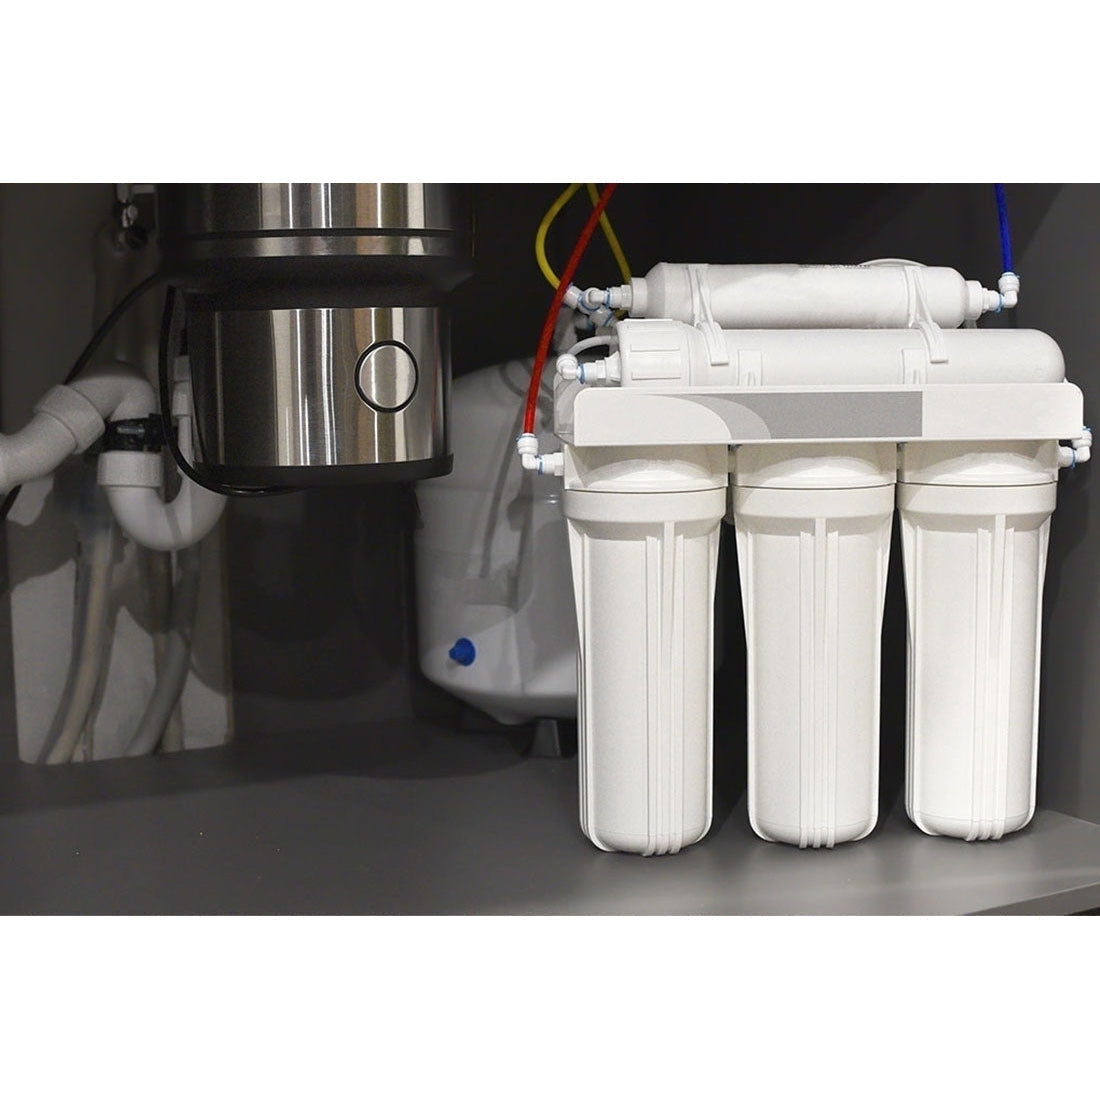 4 Advantages Of Having An Under Sink Water Filter-Vita Filters